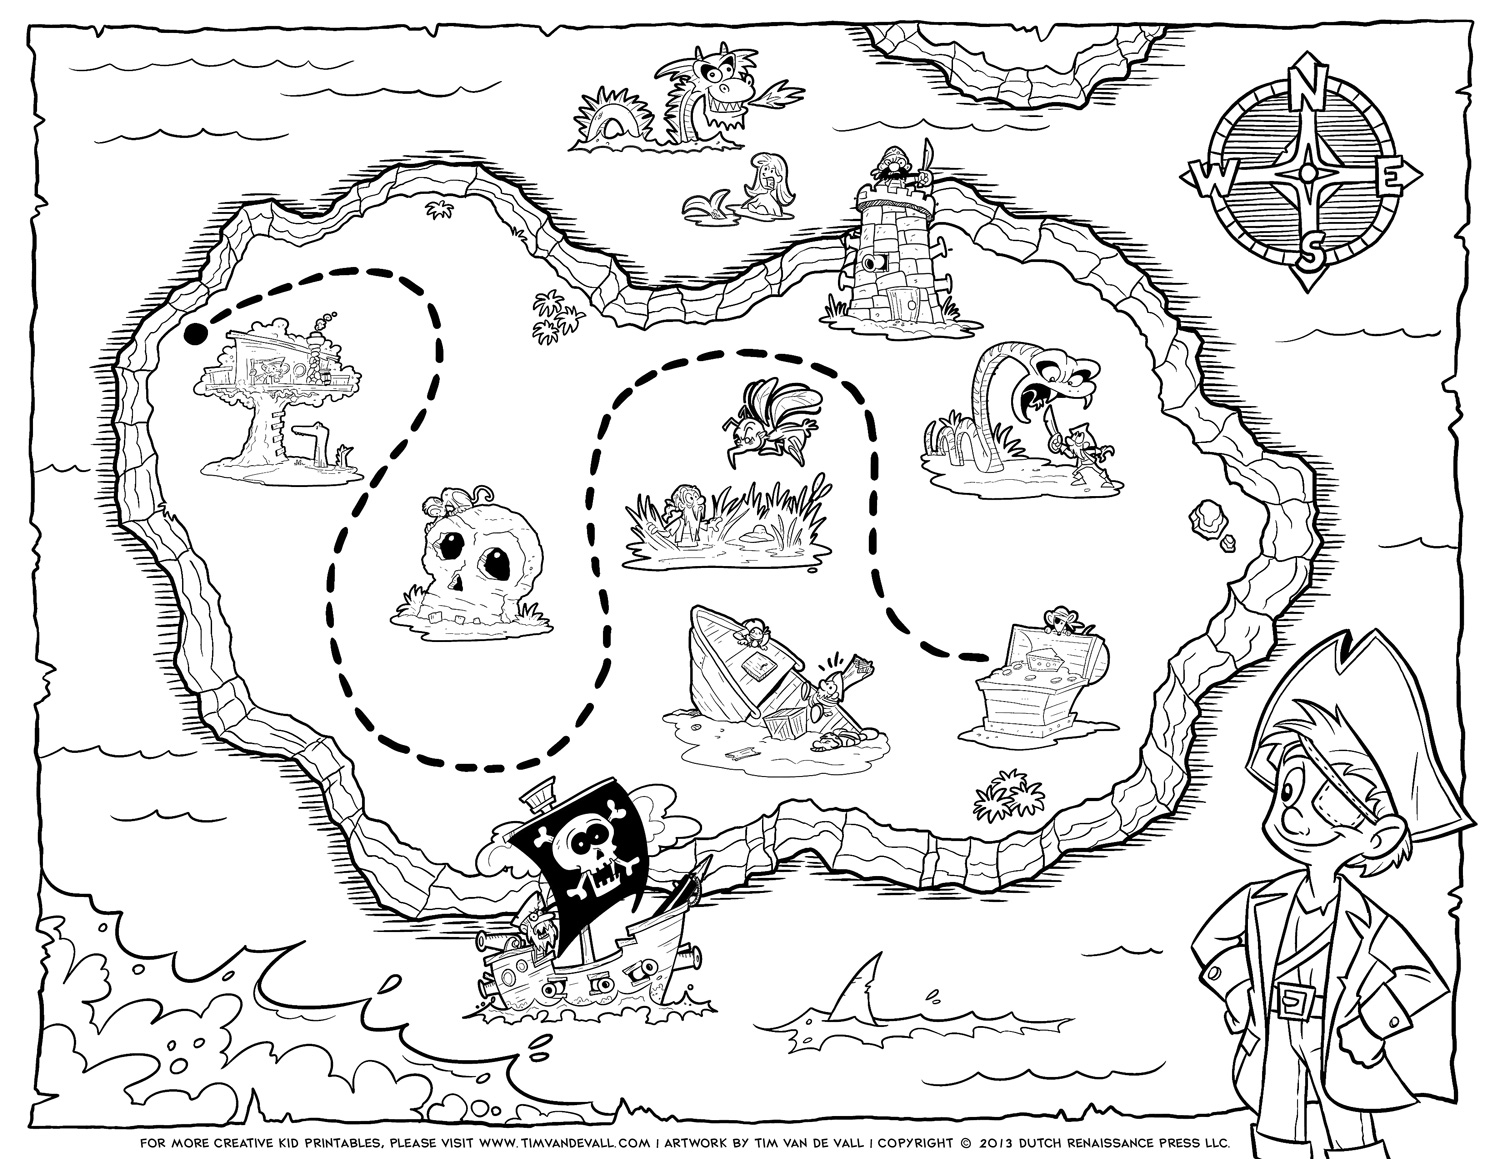 Free Pirate Treasure Maps and Party Favors for a Pirate Birthday Party